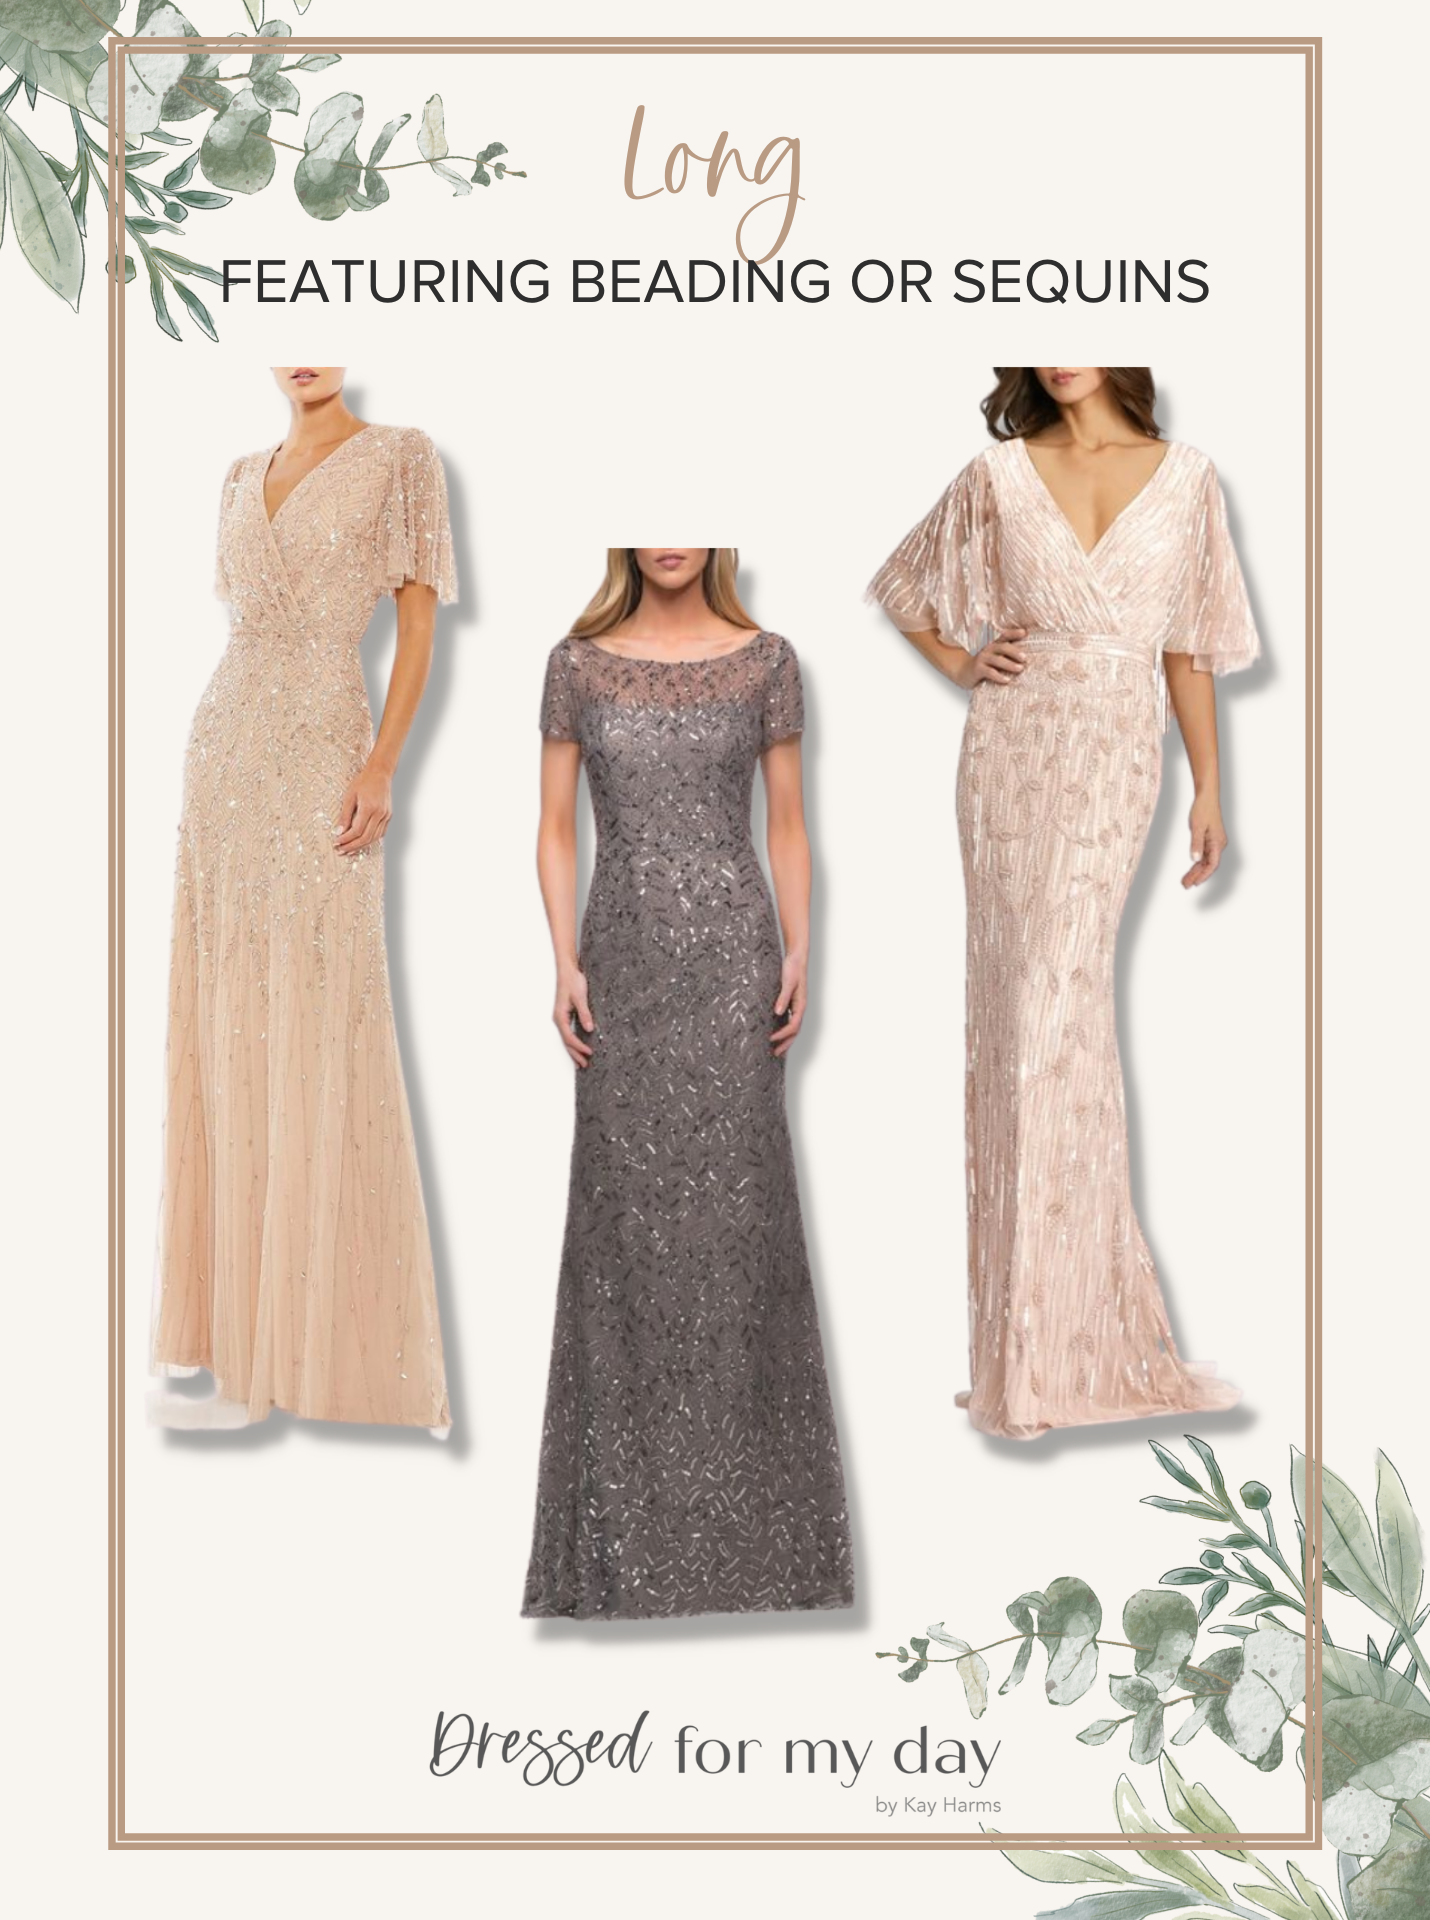 Beaded and Sequined Dresses